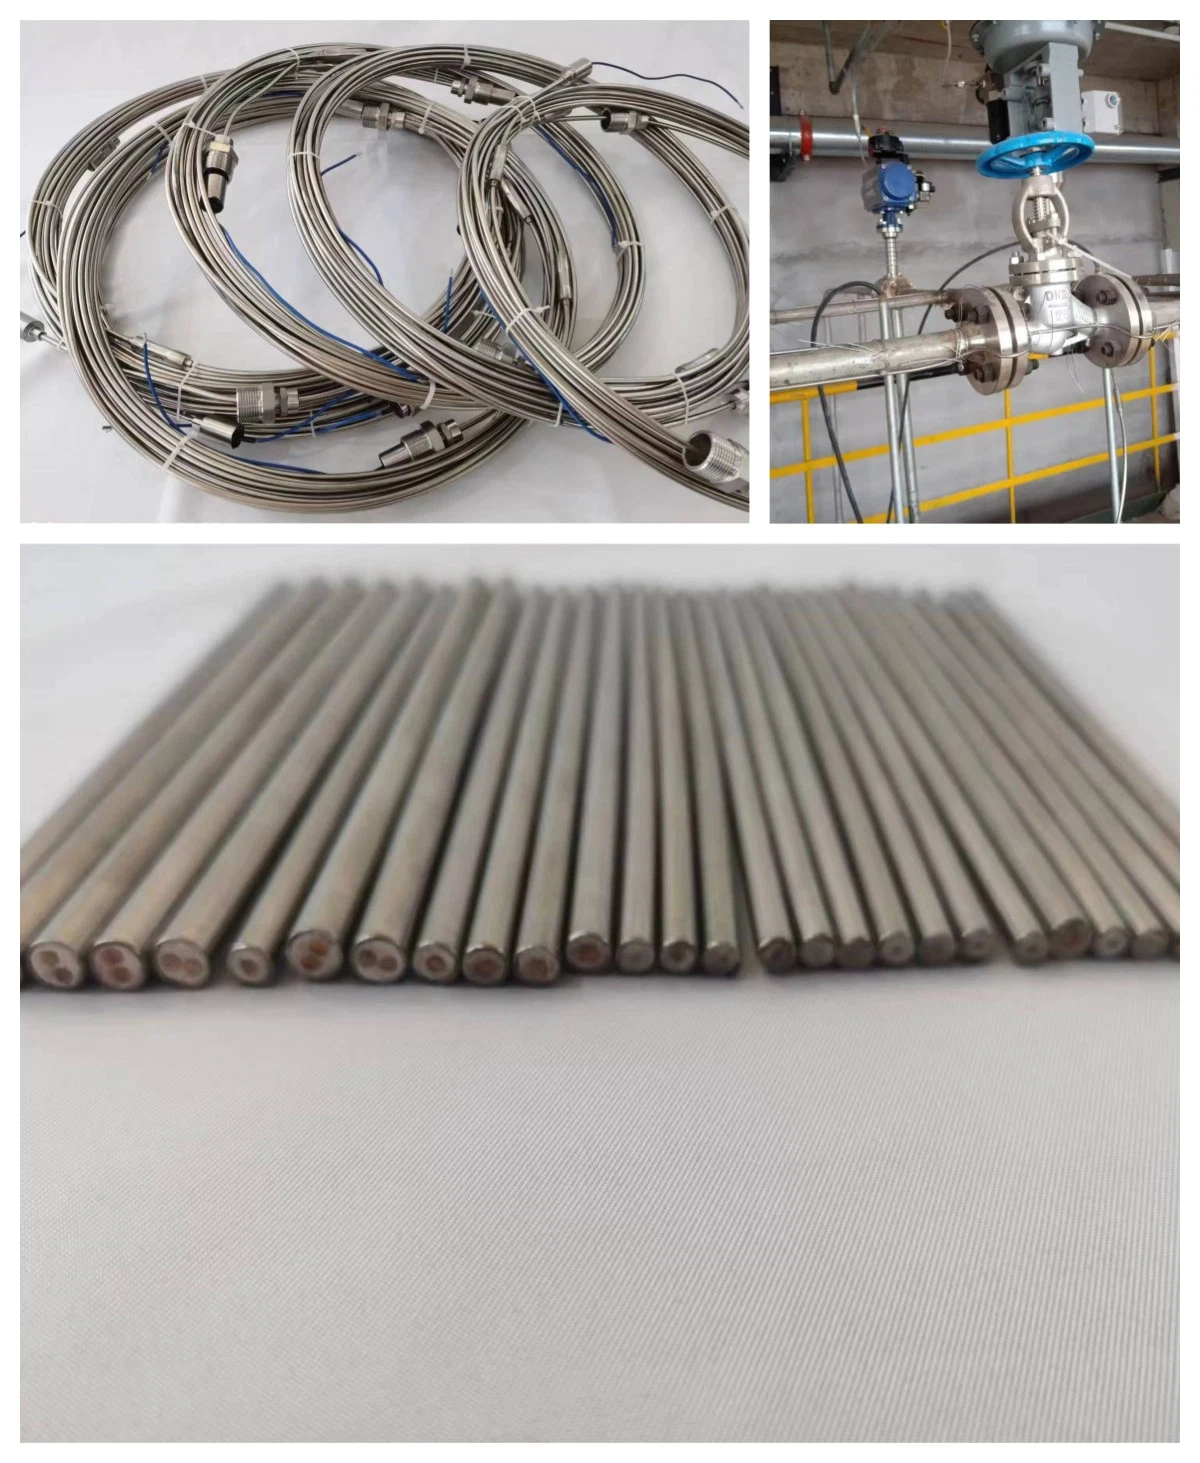 Stainless Steel Heating Cable, Railway Track Deicing Snow